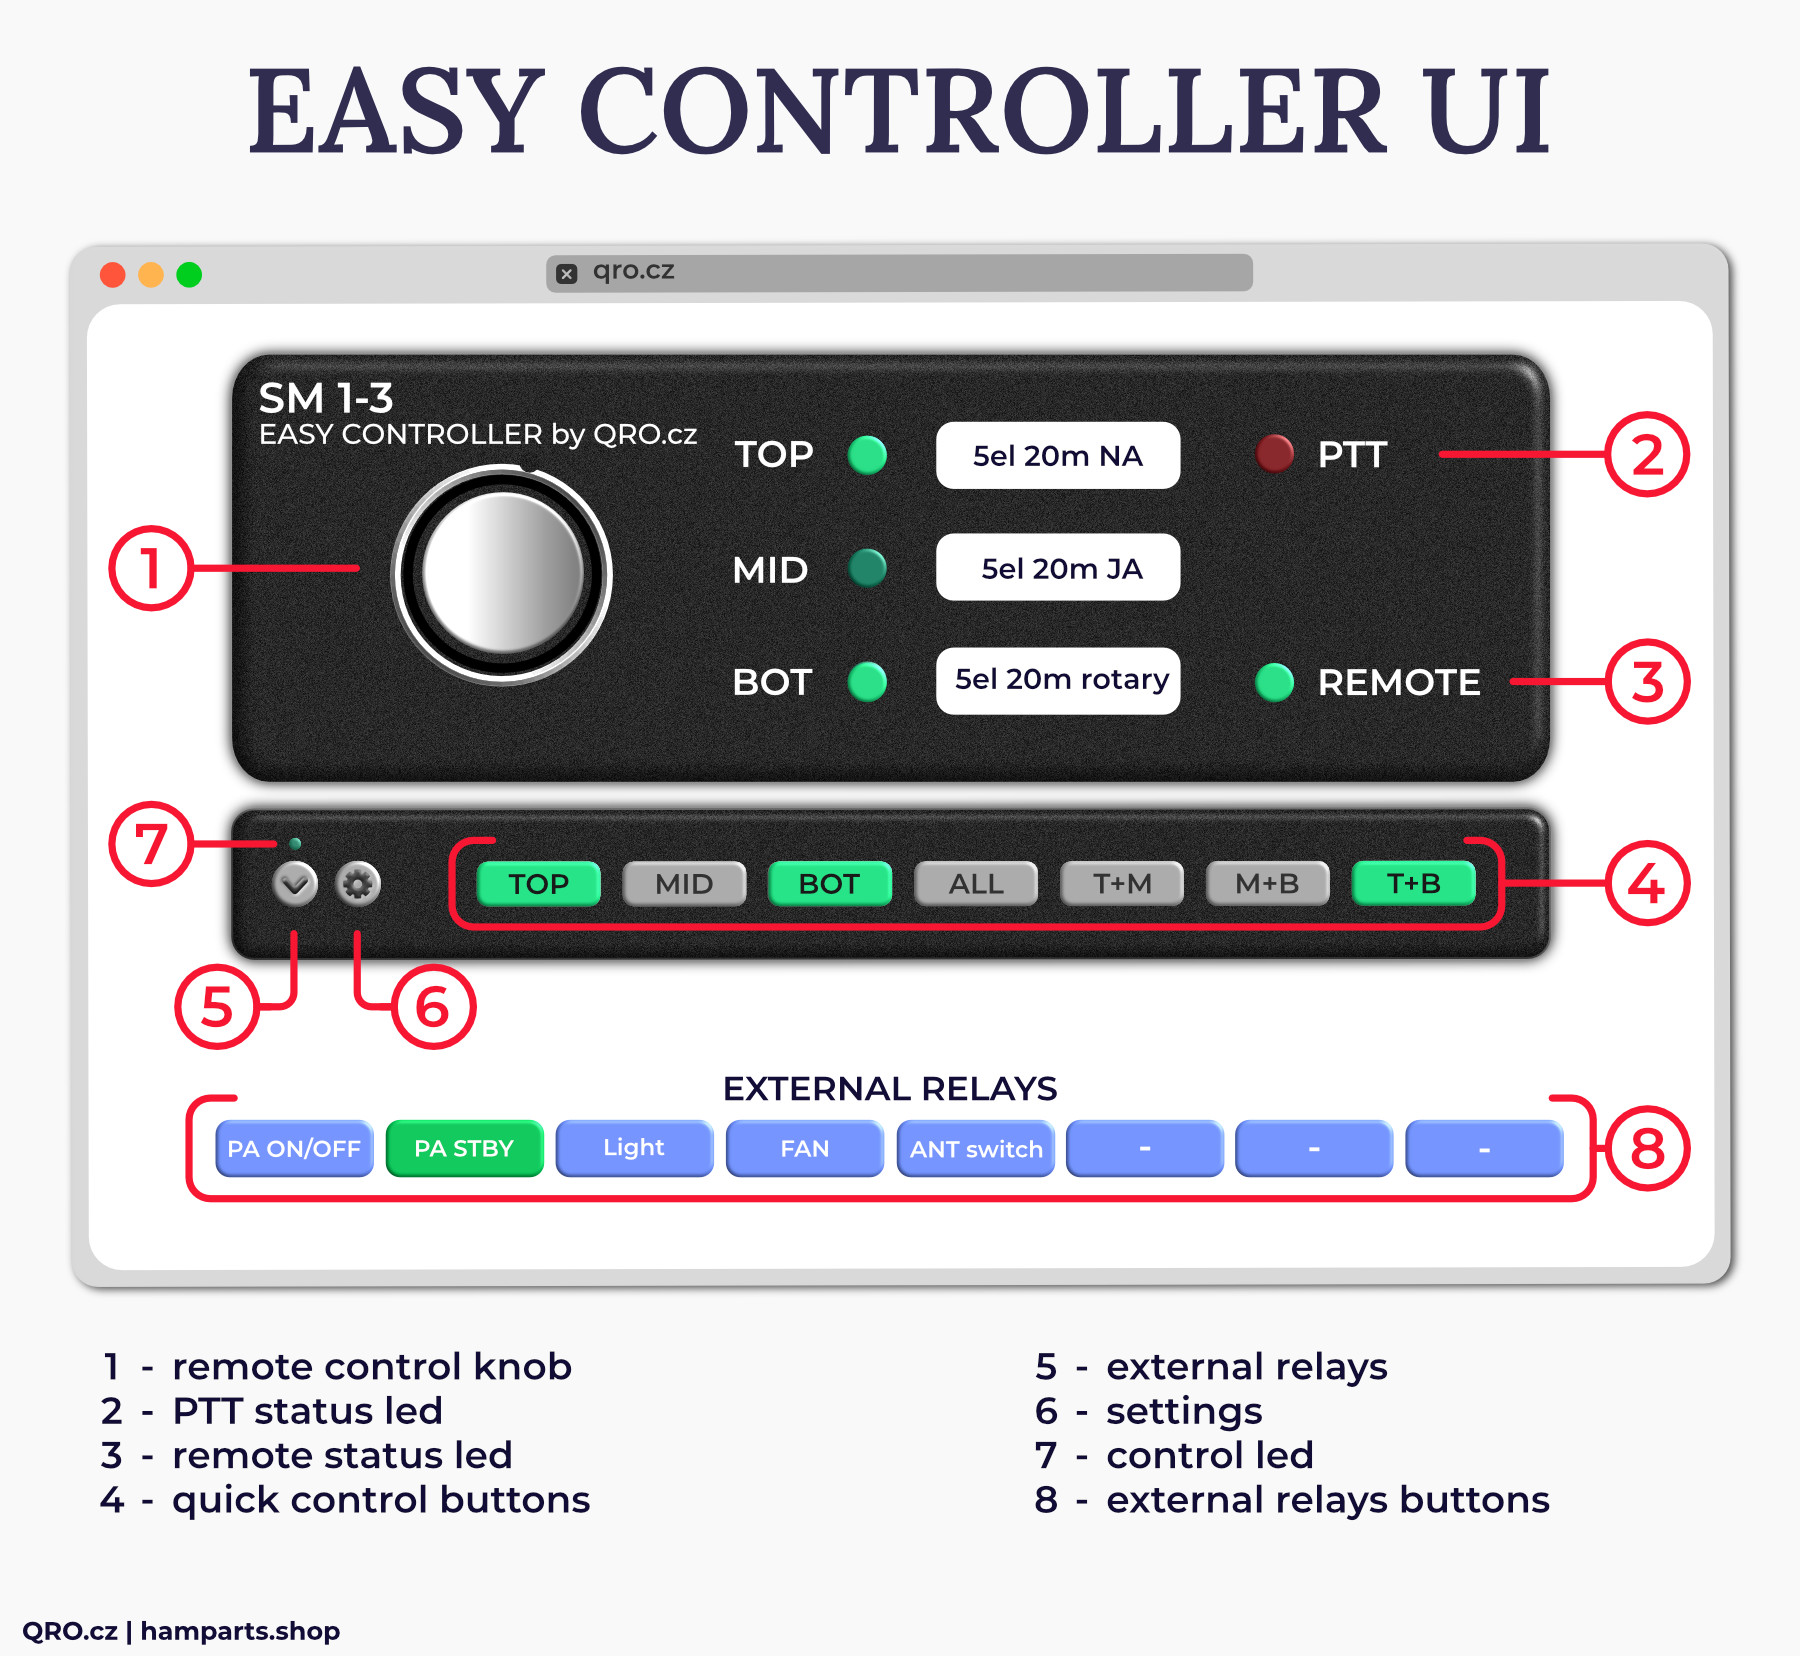 easy controller for stack match and antenna switch user interface by qro.cz hamparts.shop